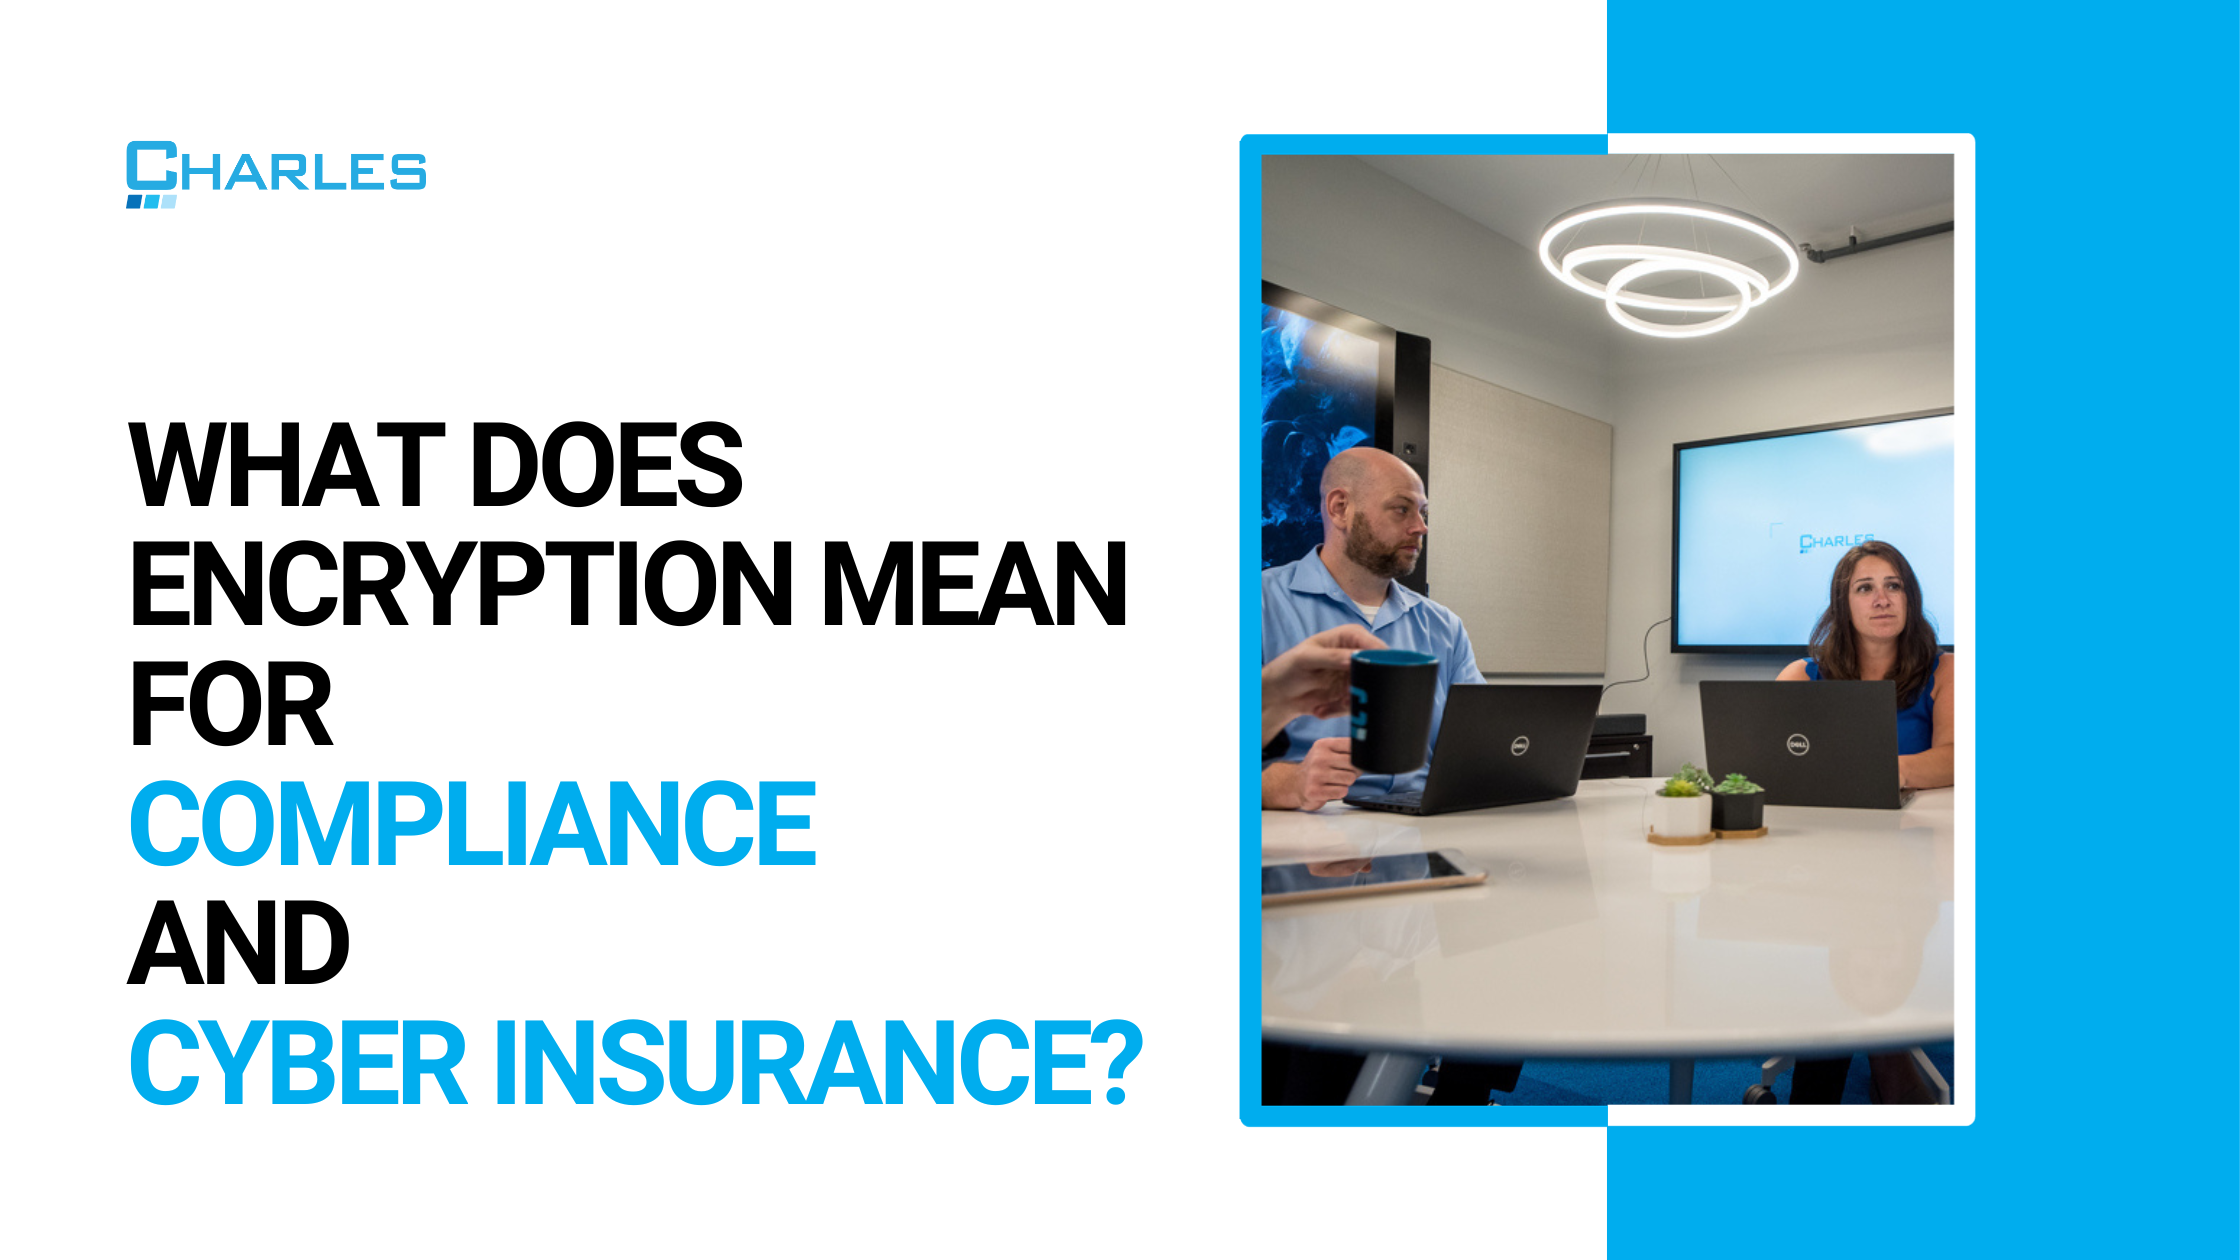 What Does Encryption Mean for Compliance and Cyber Insurance?